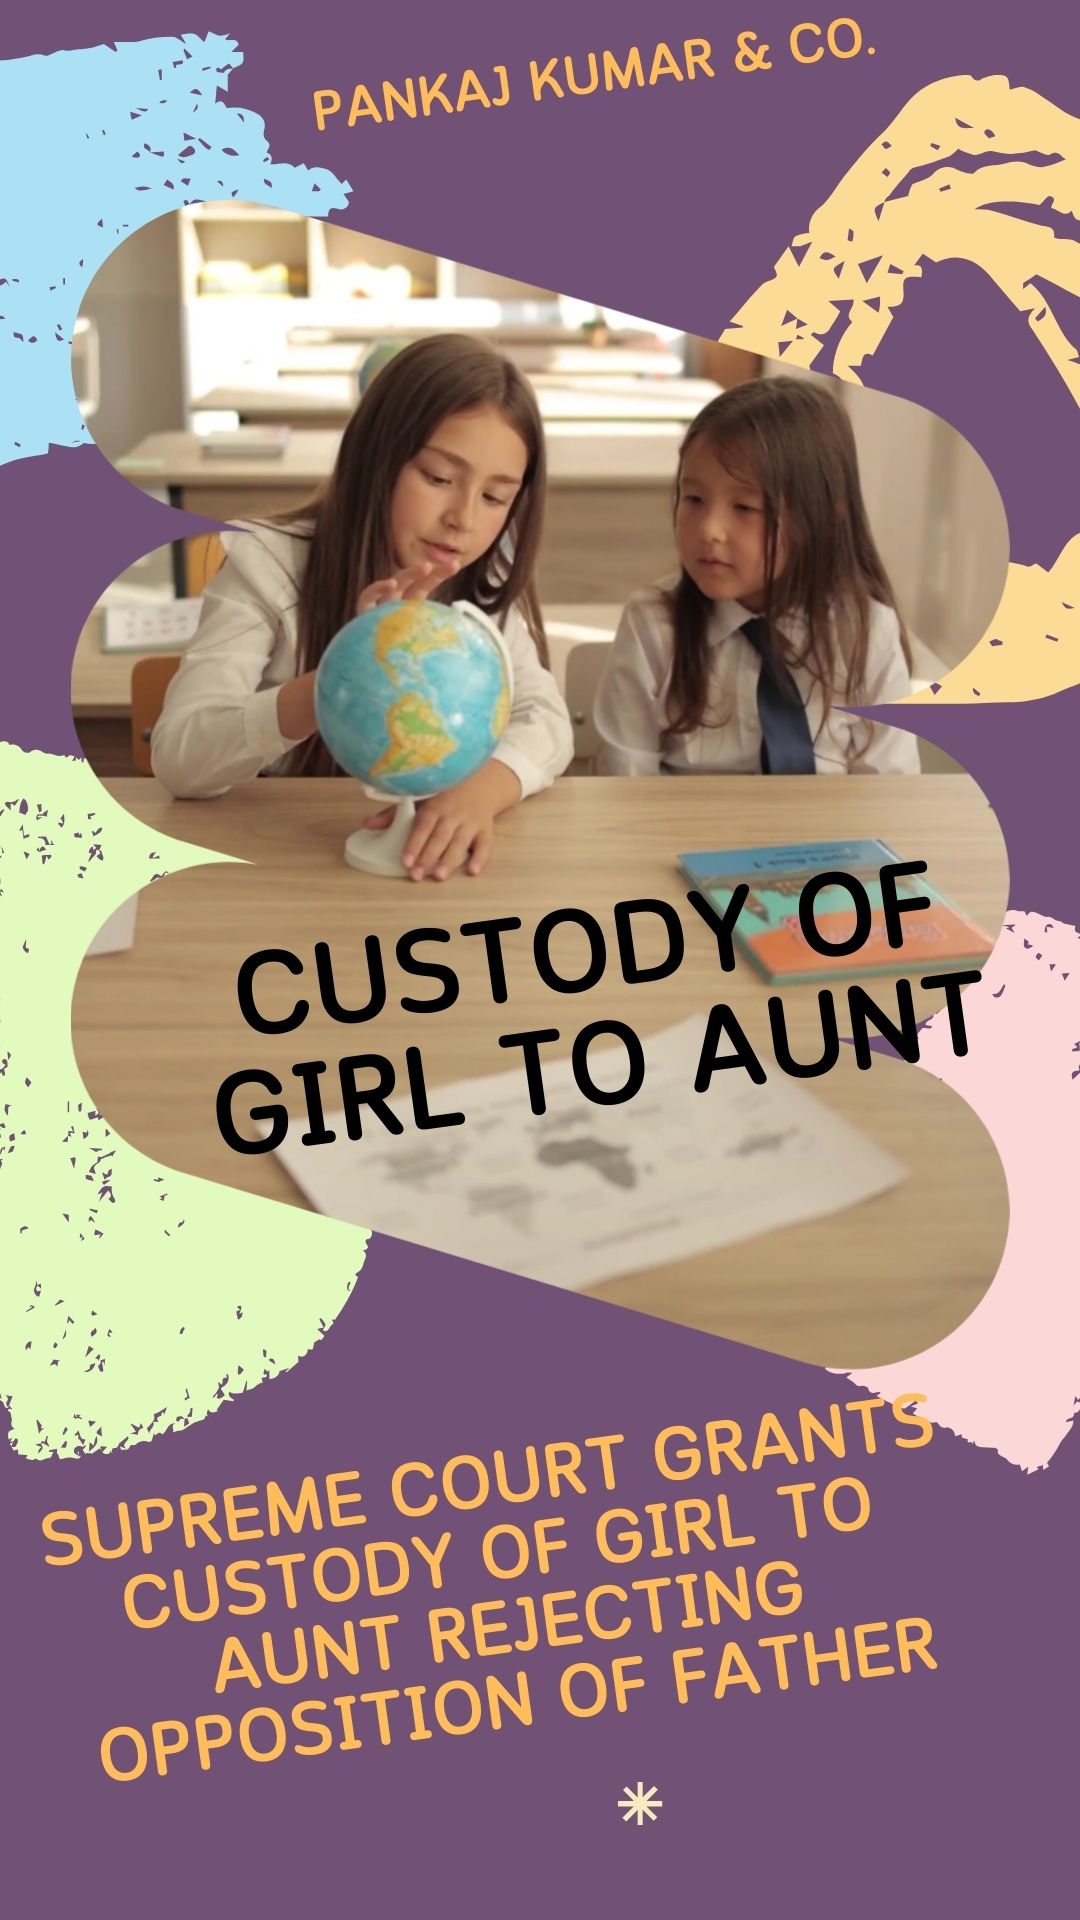 Supreme Court Grants Custody Of Girl To Aunt Rejecting Opposition Of Father